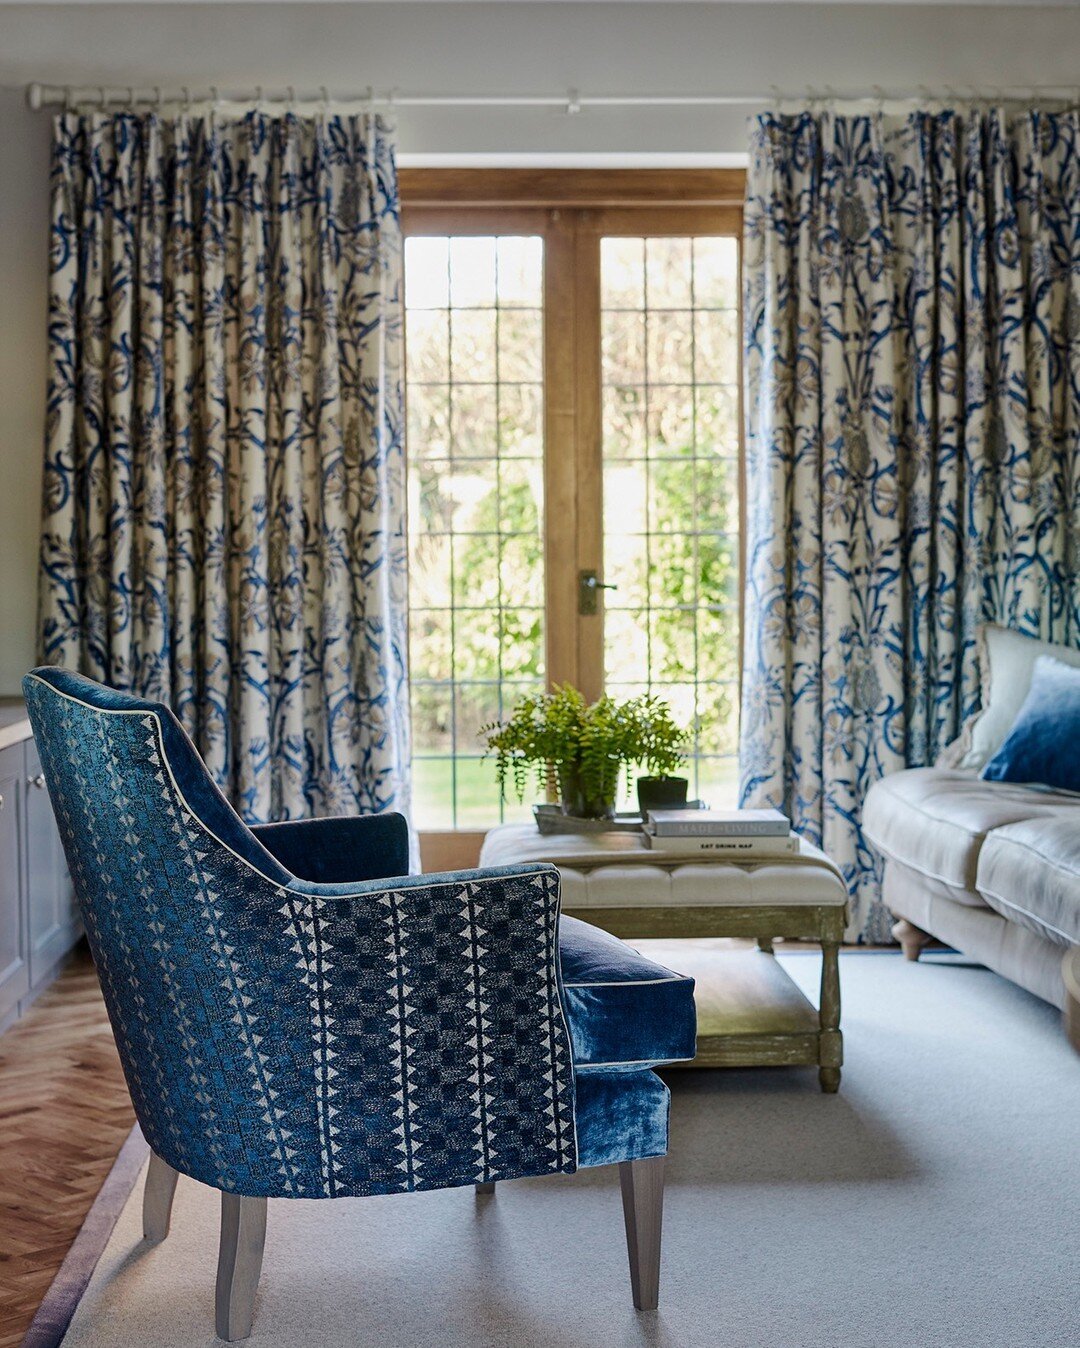 This beautiful corner of a study provides the perfect place to relax and look out on to the stunning garden. We love the use of different patterns in this room as well - both on the curtain fabric and on the back of this striking armchair. ​​​​​​​​
​